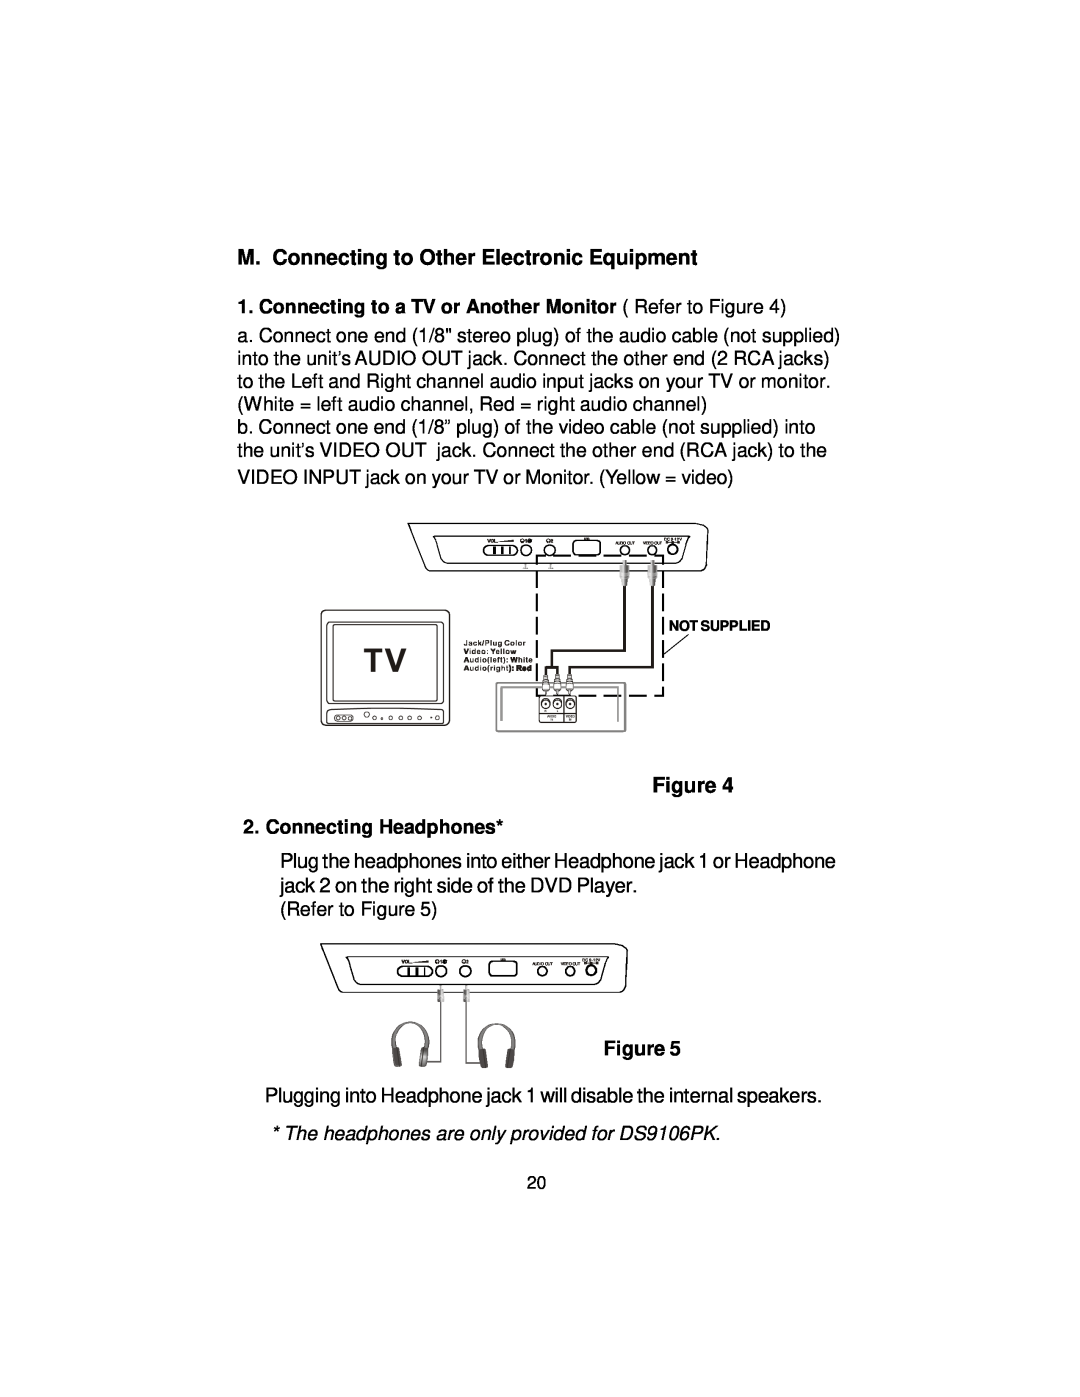 Audiovox DS9106 manual M. Connecting to Other Electronic Equipment, Connecting to a TV or Another Monitor Refer to Figure 